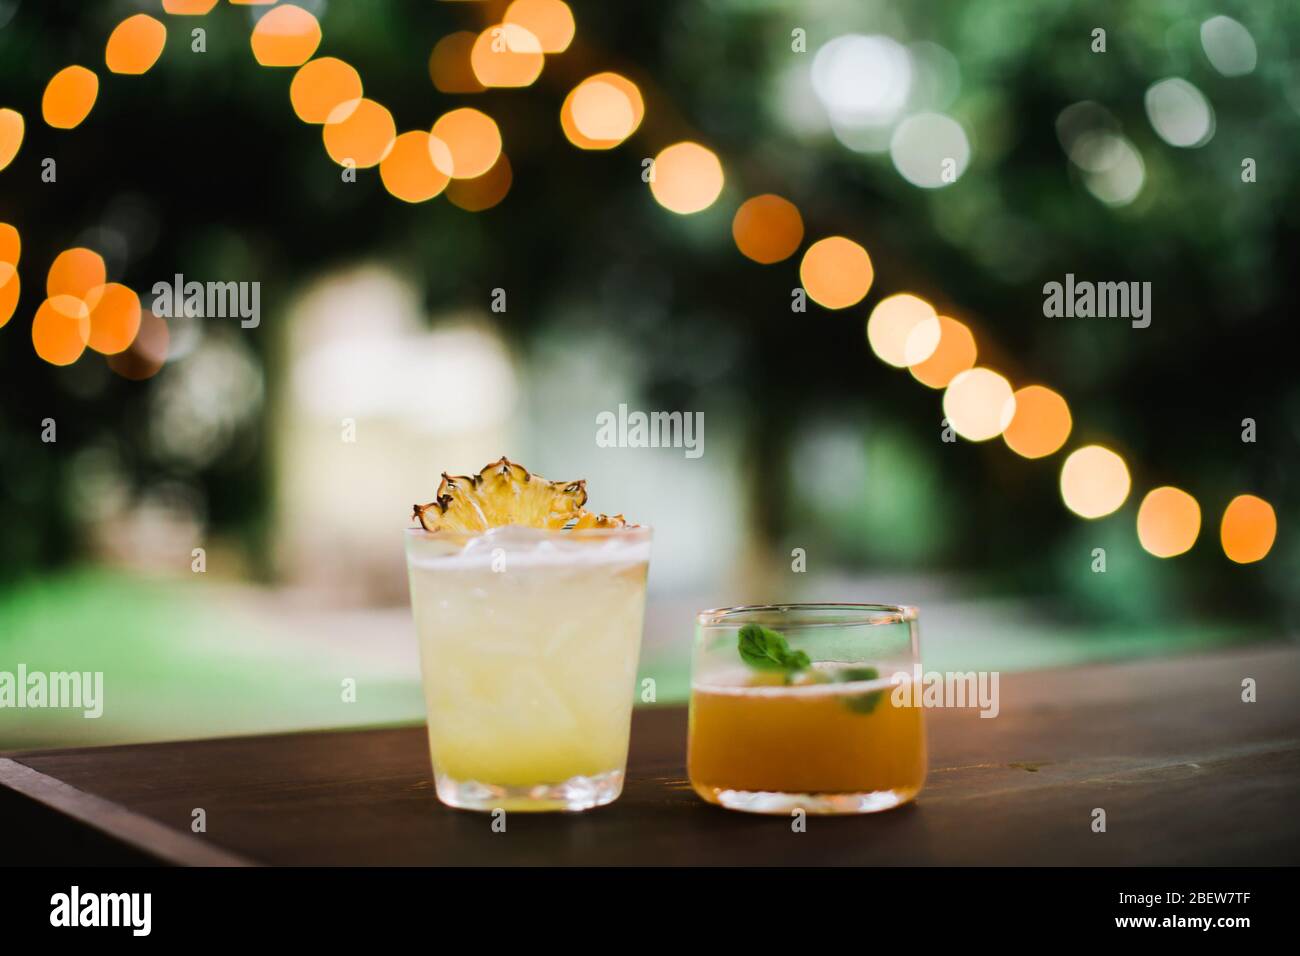 Cocktail drinks close up photo Stock Photo